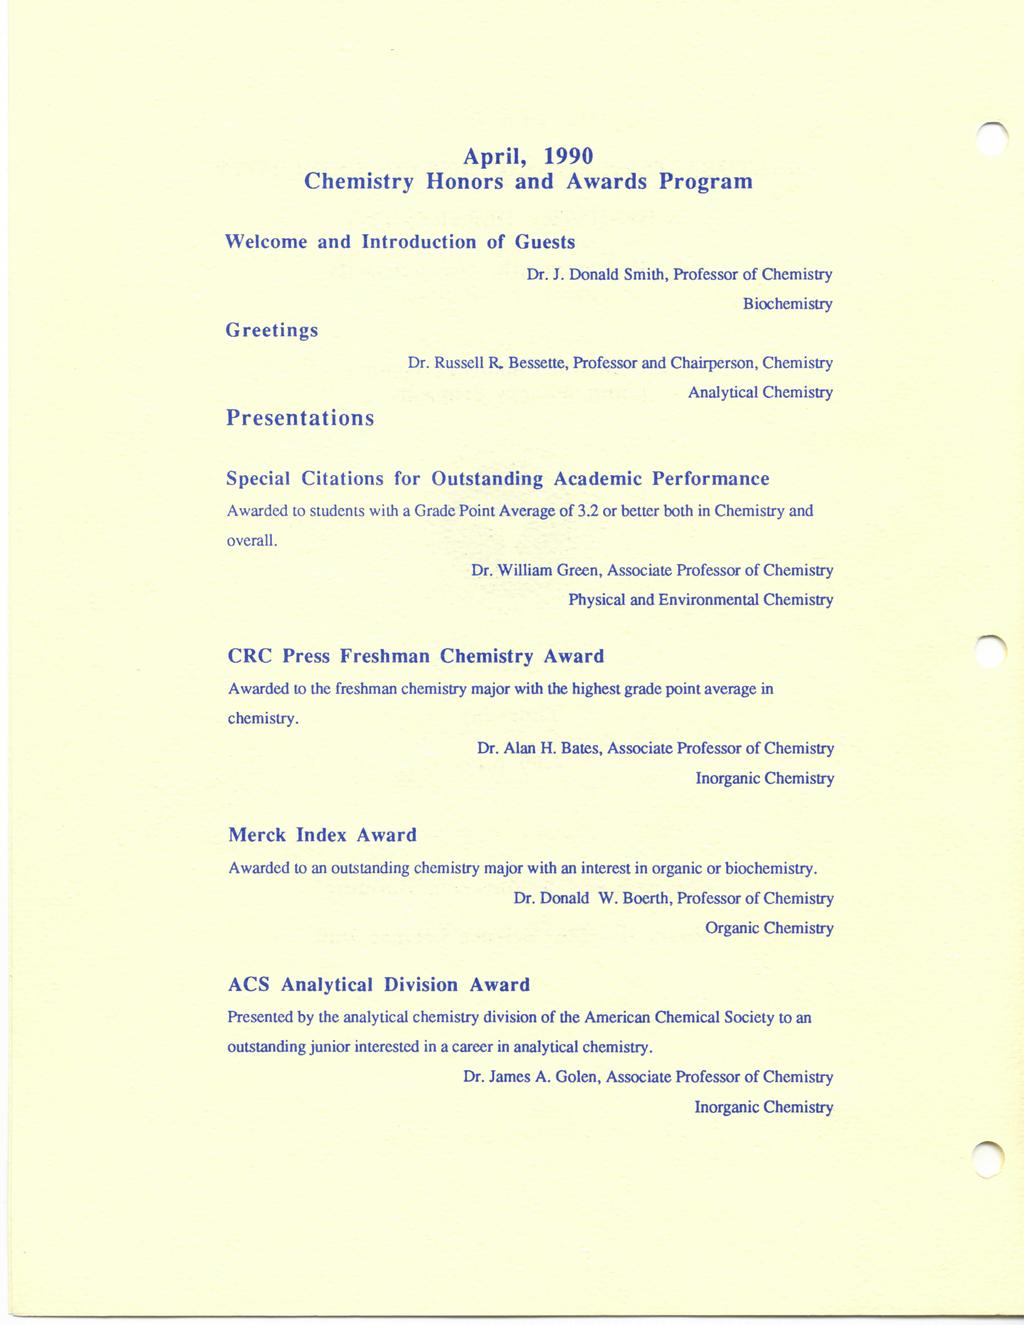 April, 1990 Chemistry Honors and Awards Program Welcome and Introduction of Guests Dr. J. Donald Smith, Professor of Chemistry Greetings Dr. Russell R.